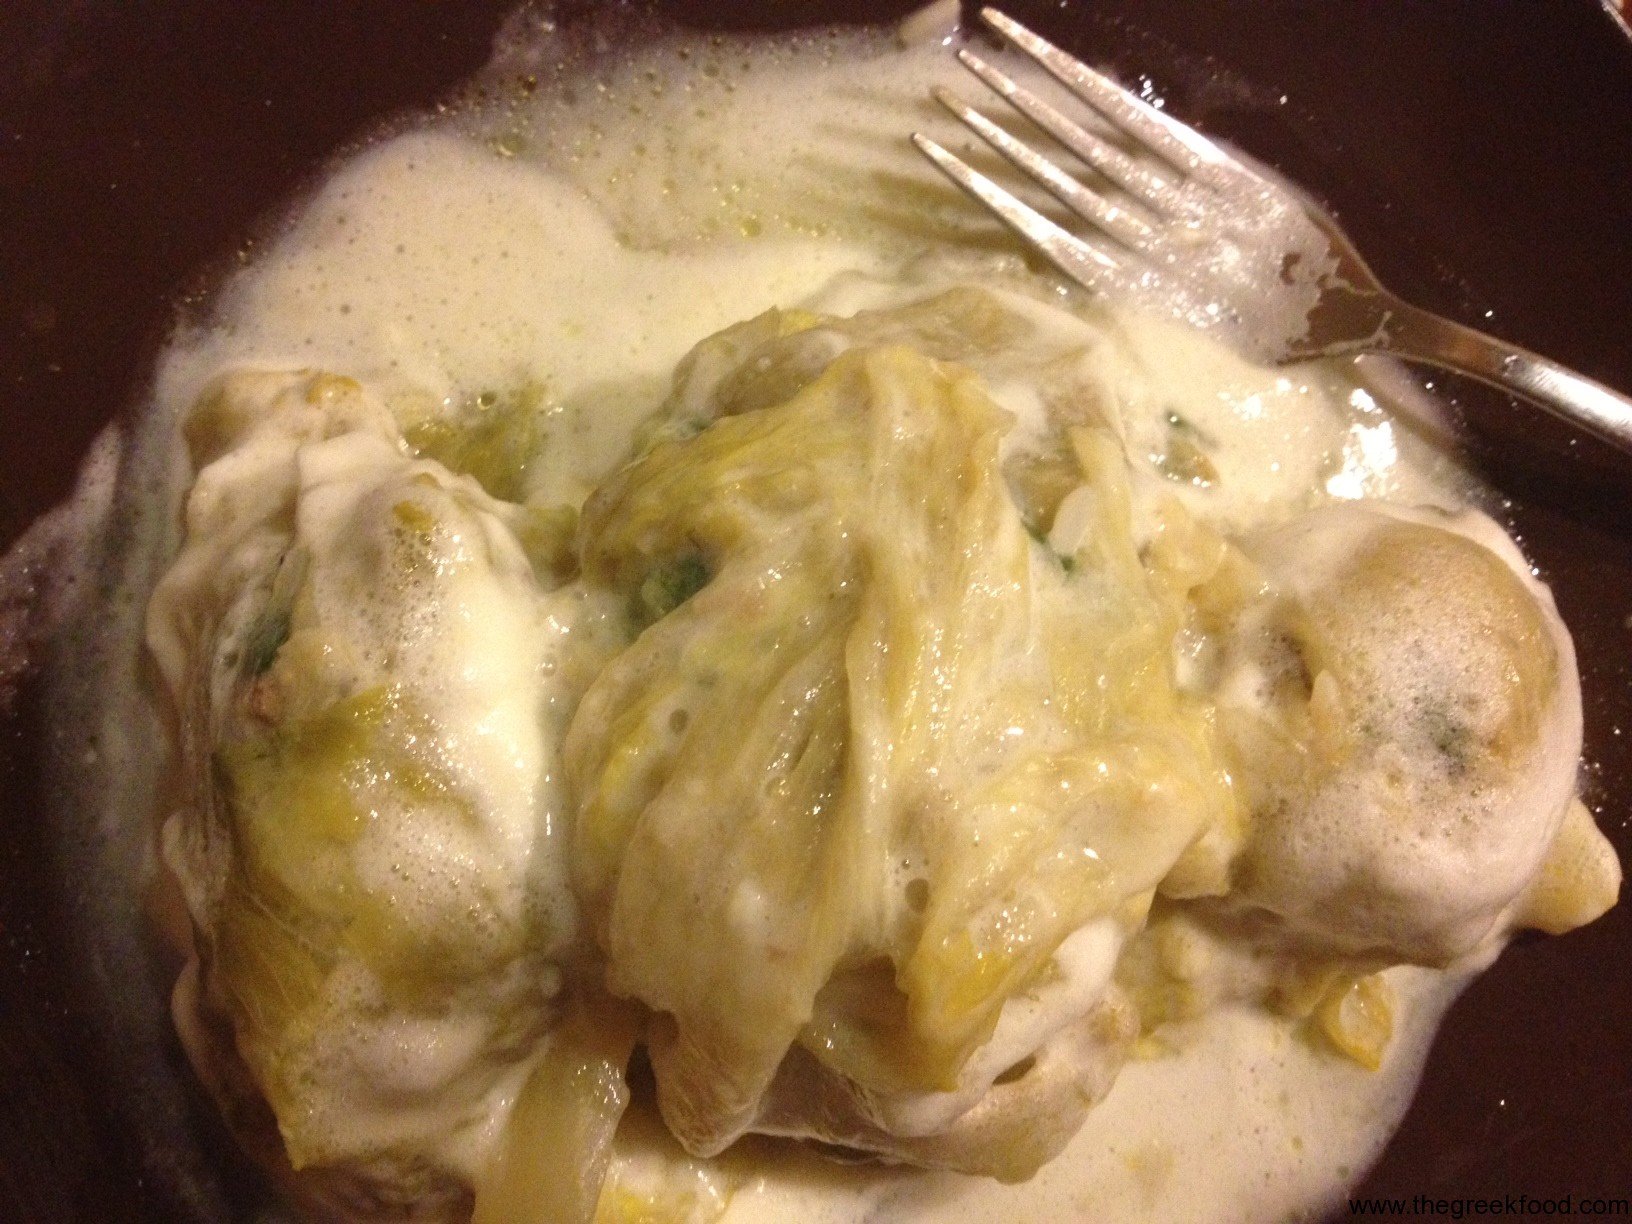 Making Lachanodolmades – stuffed cabbage leaves